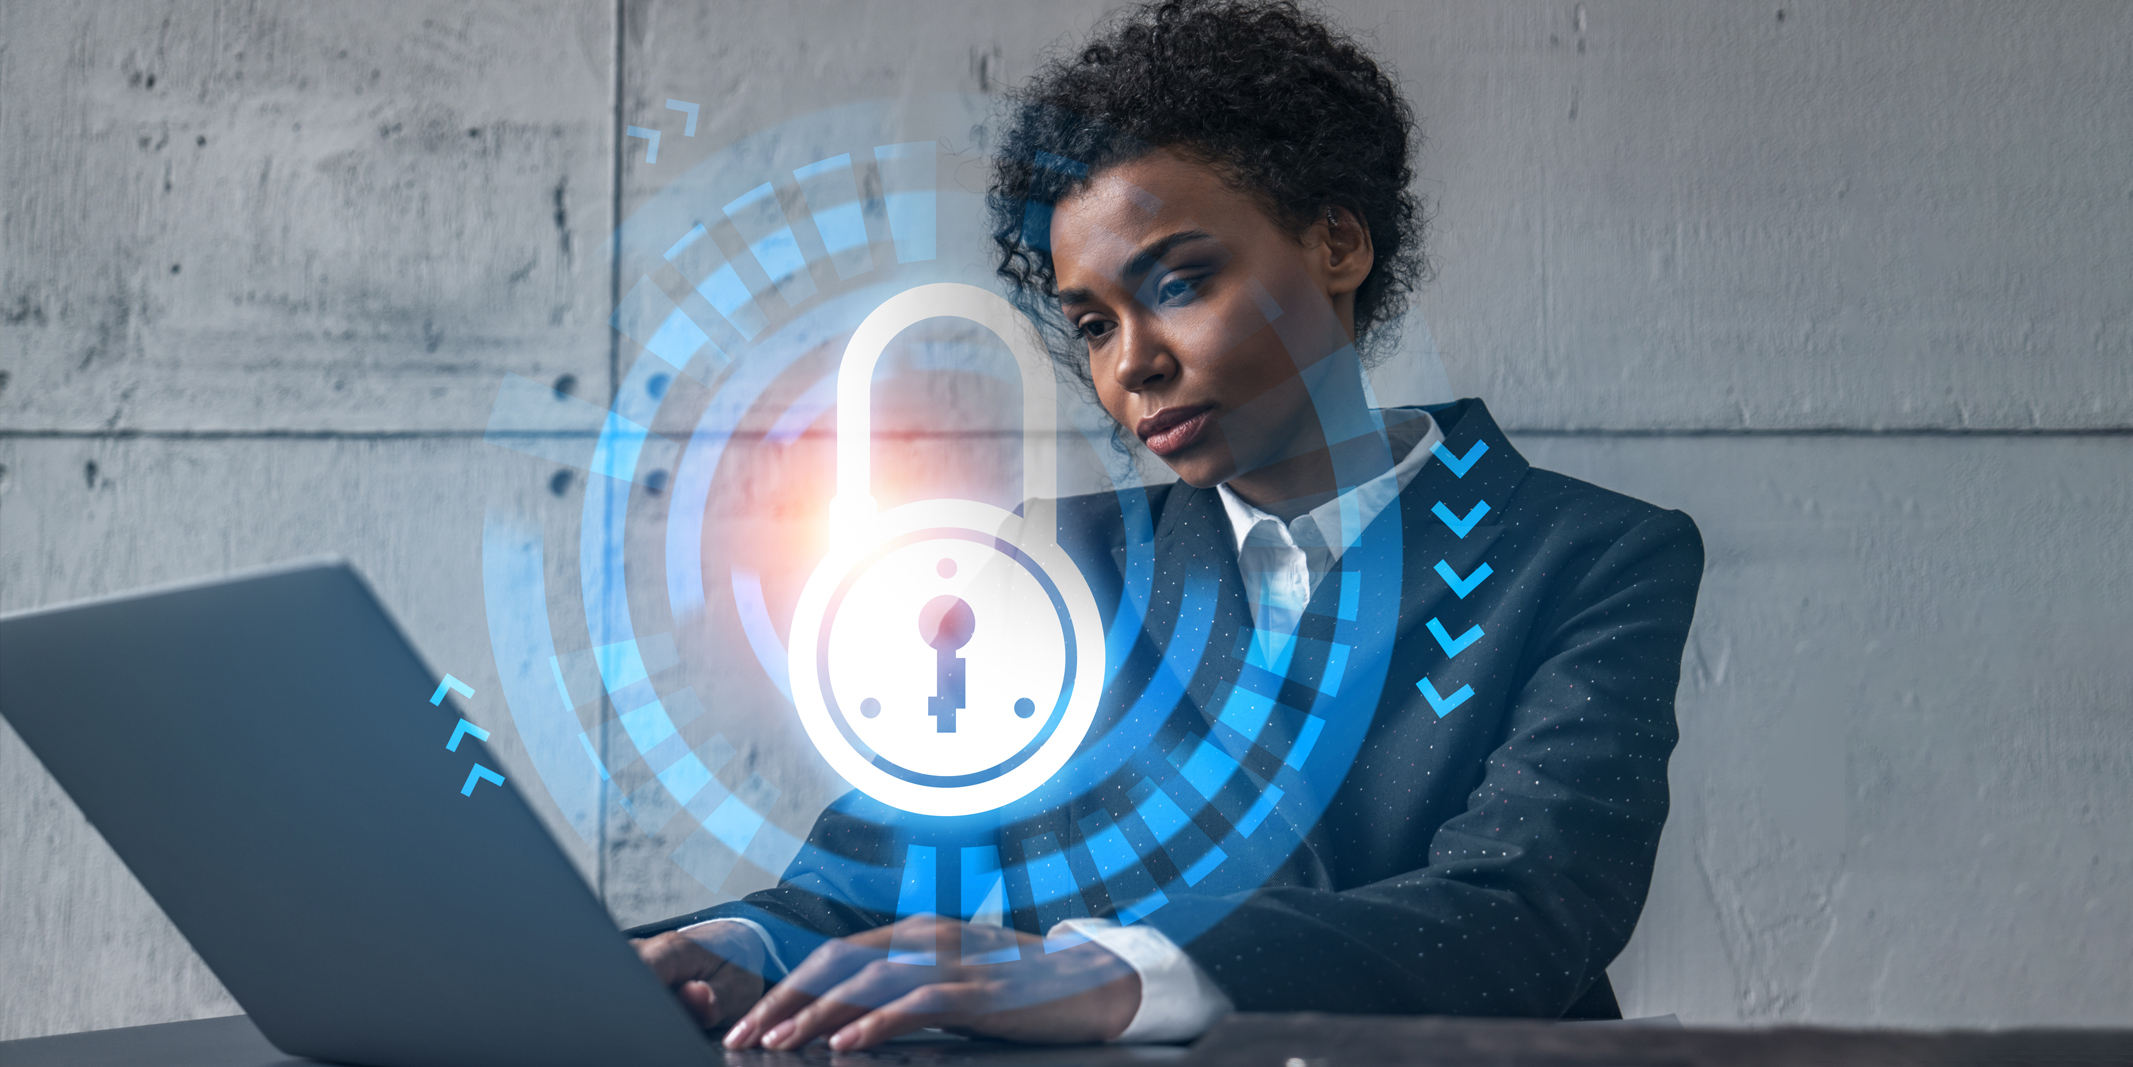 woman with a cyber security icon overlay